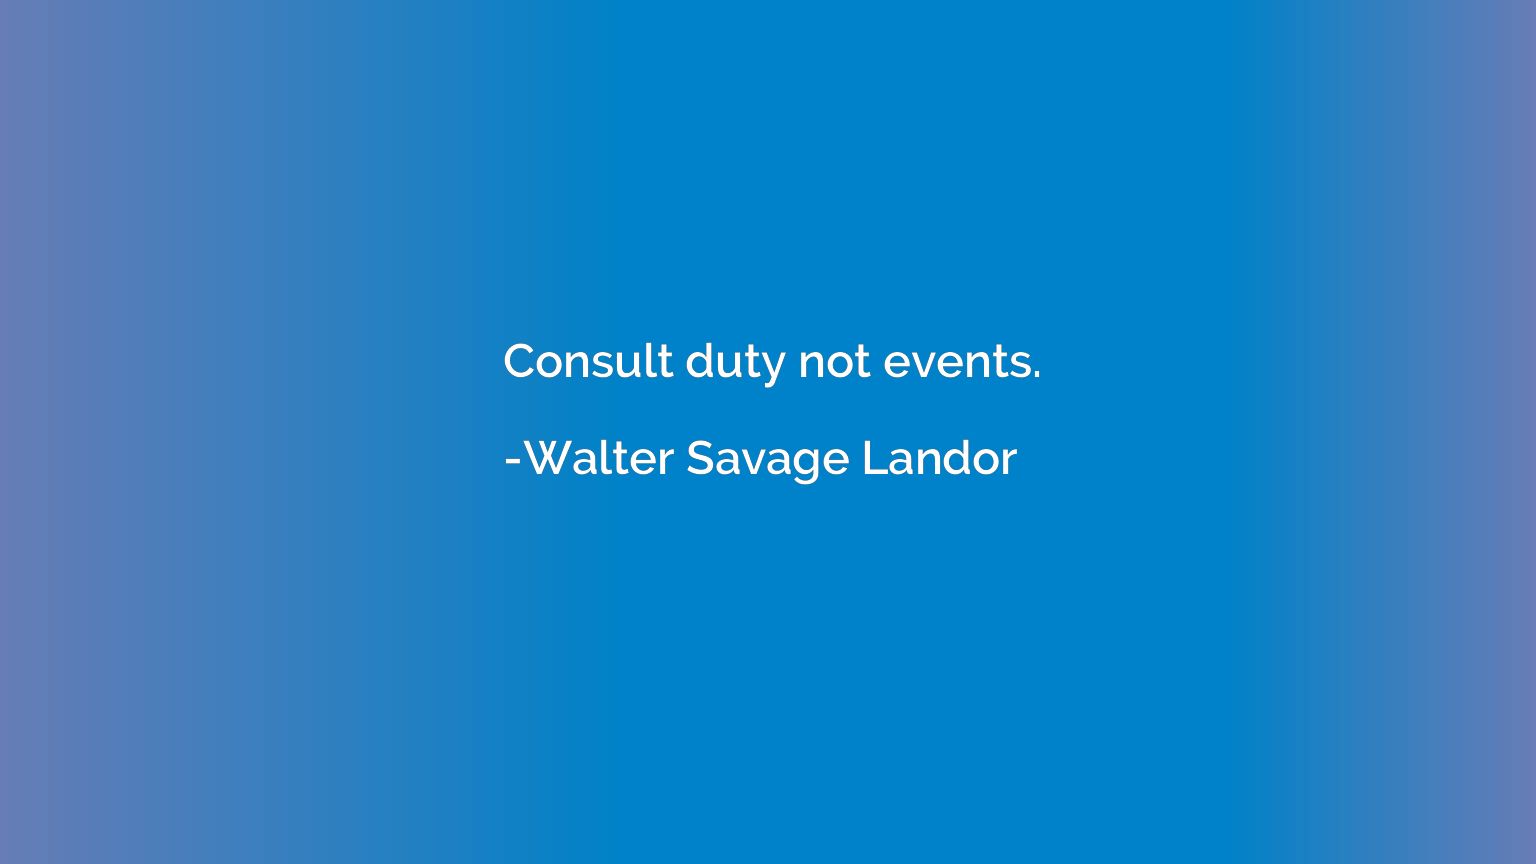 Consult duty not events.